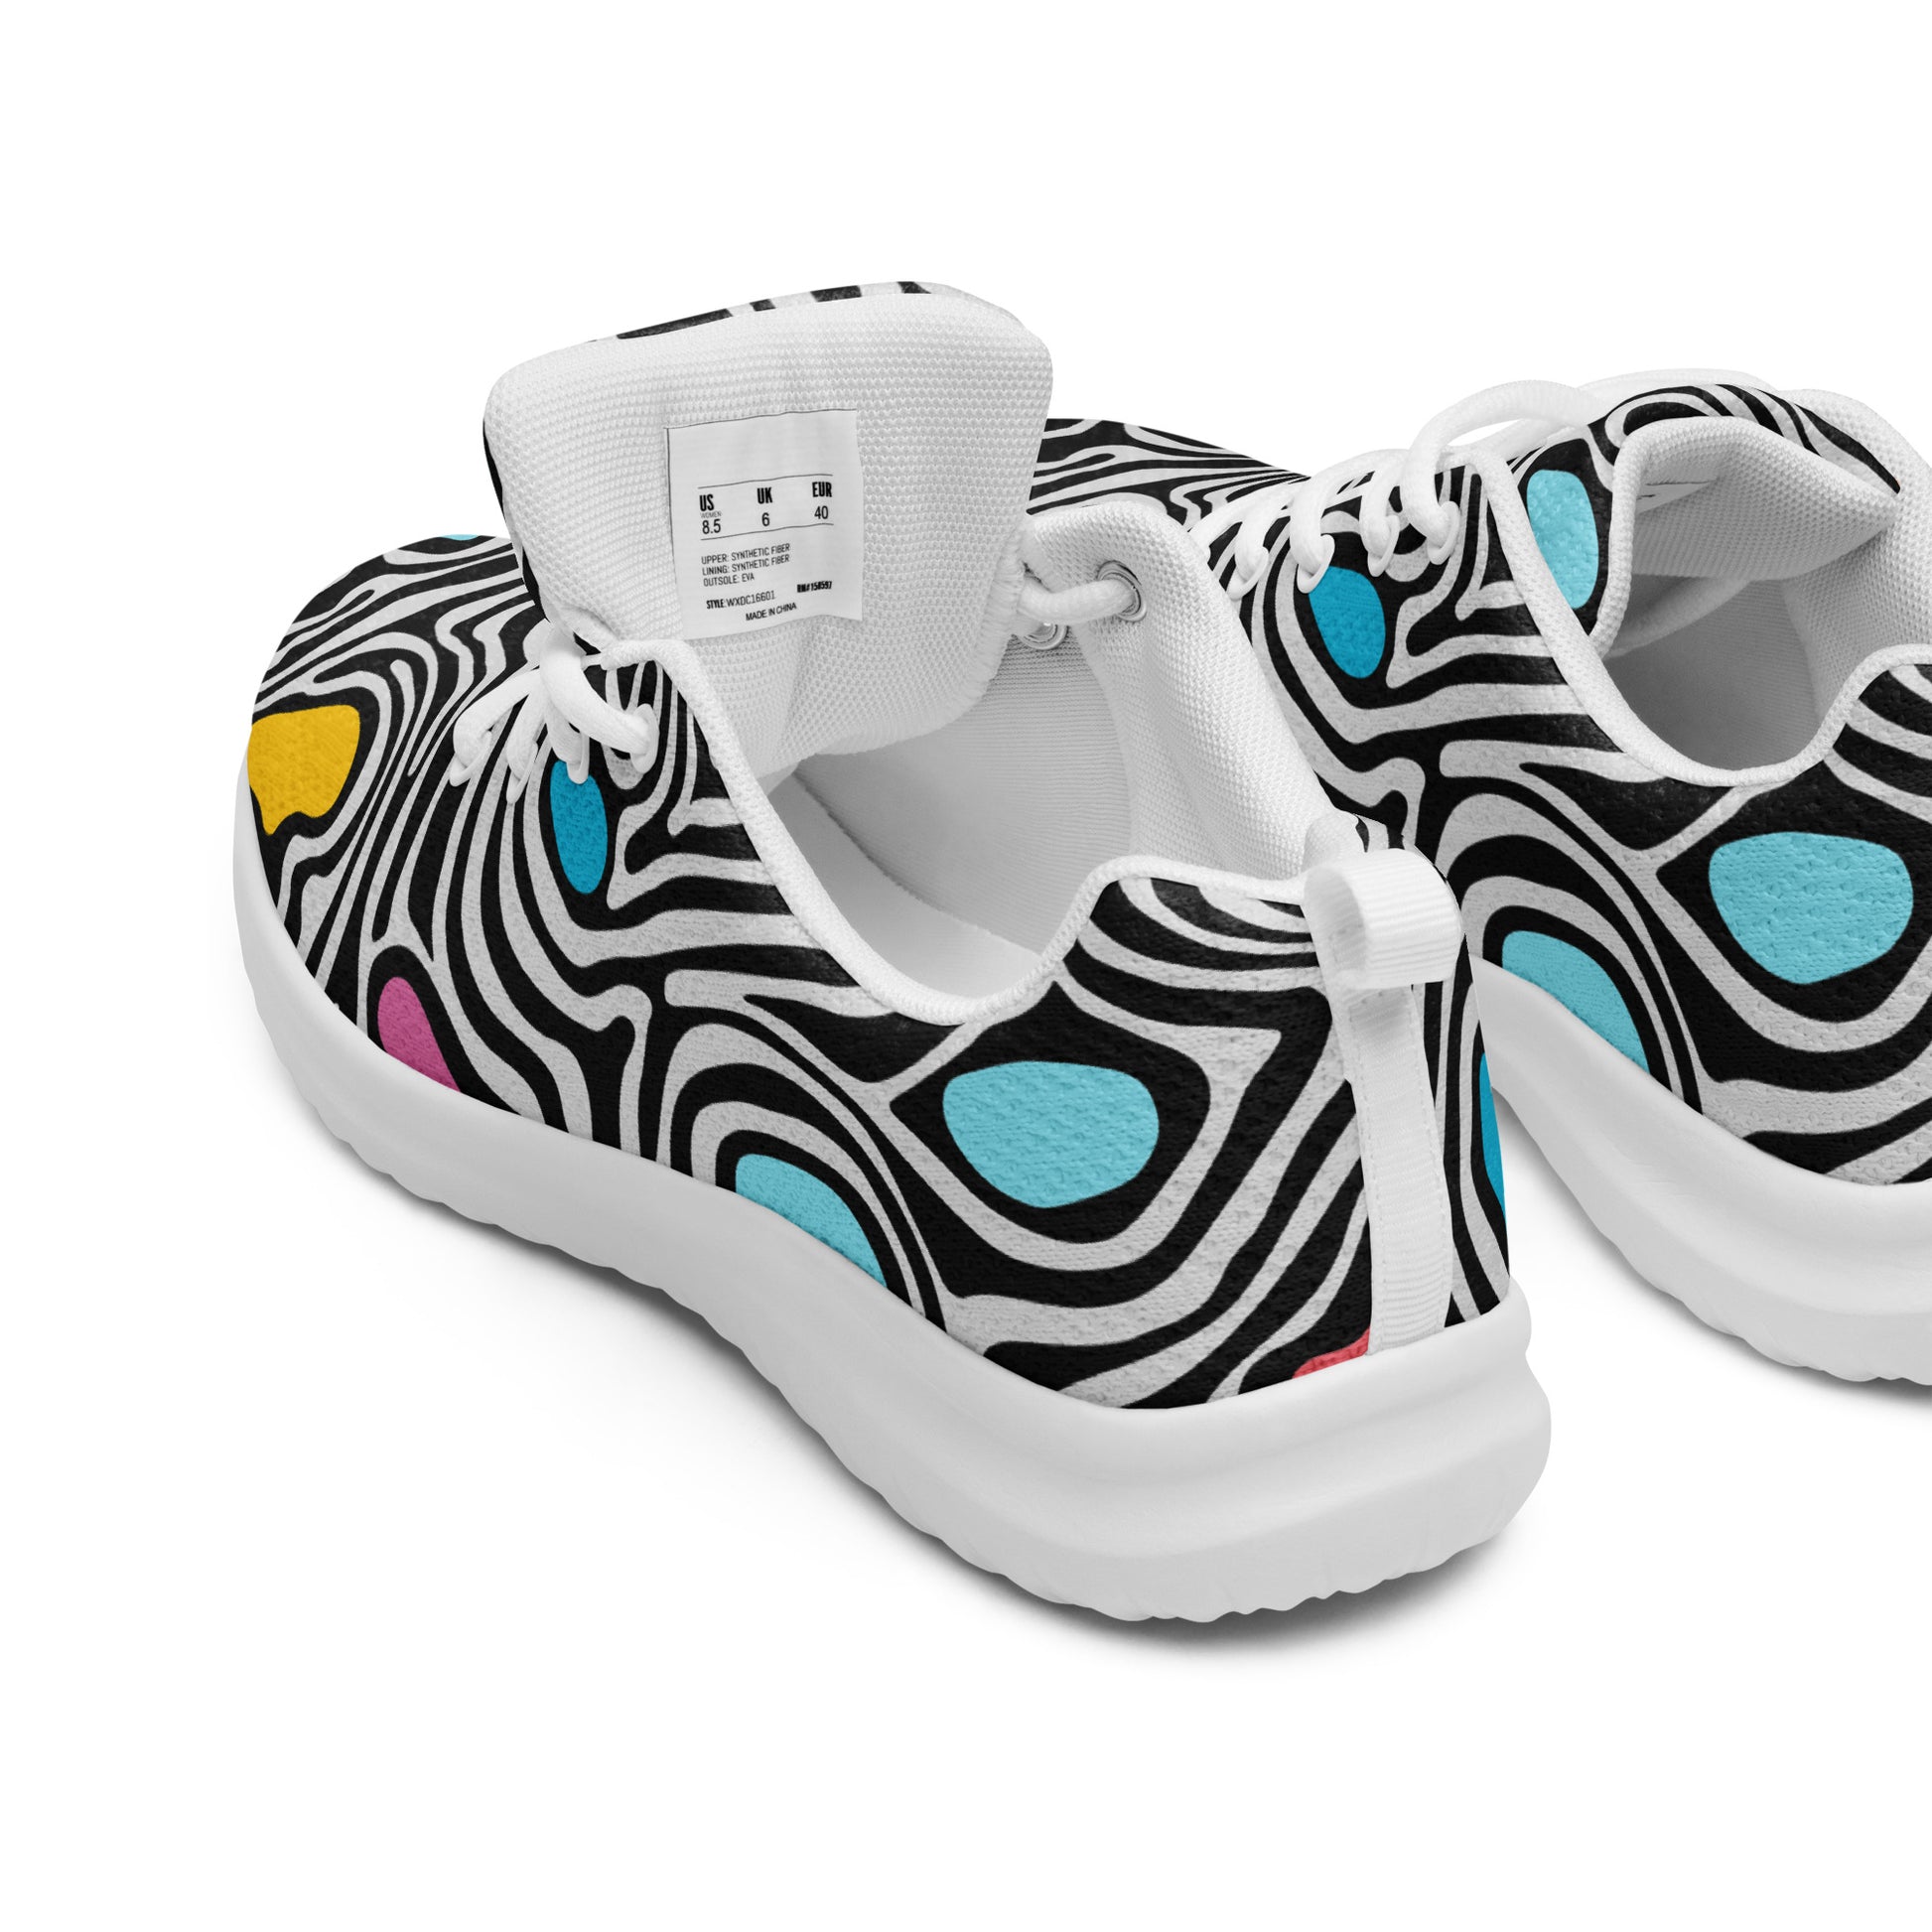 Trippy - Women’s athletic shoes Womens Athletic Shoes